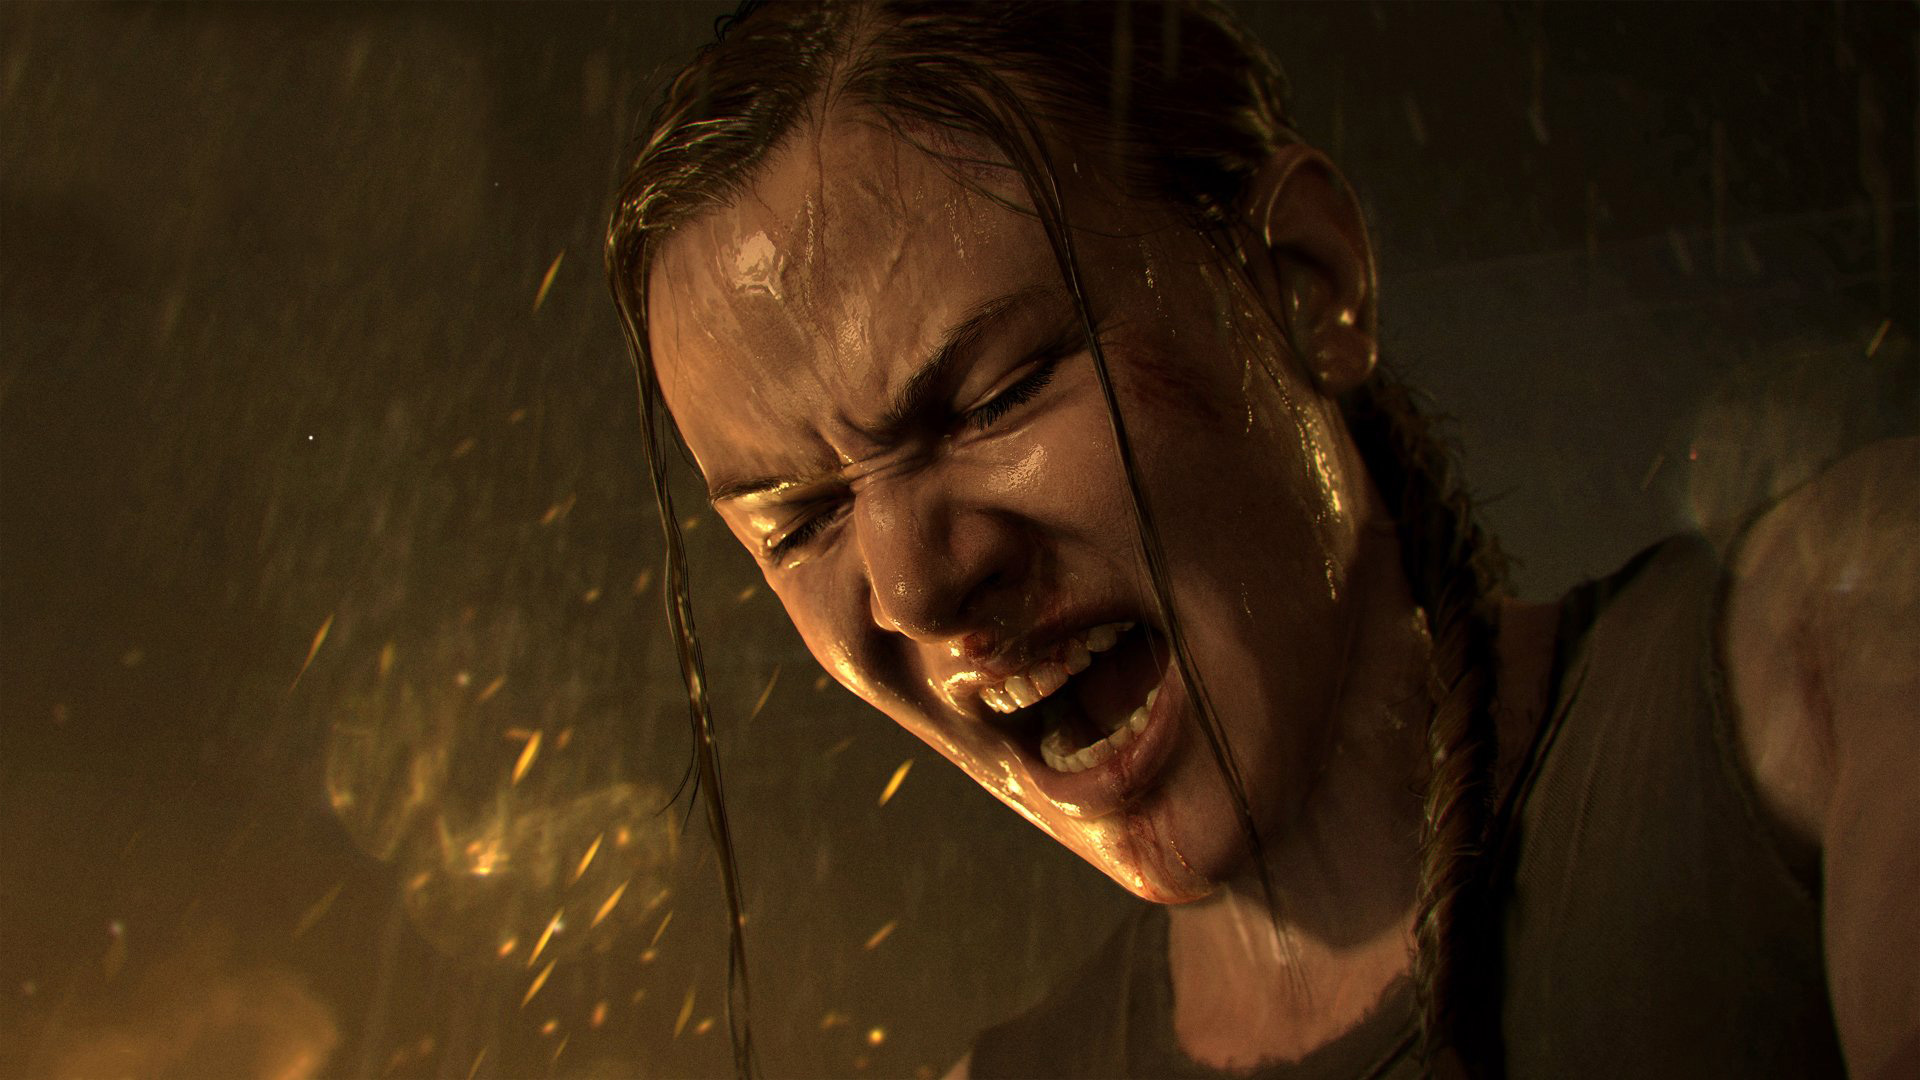 Regardless of opinion, do you think Abby Is attractive? : r/TheLastOfUs2